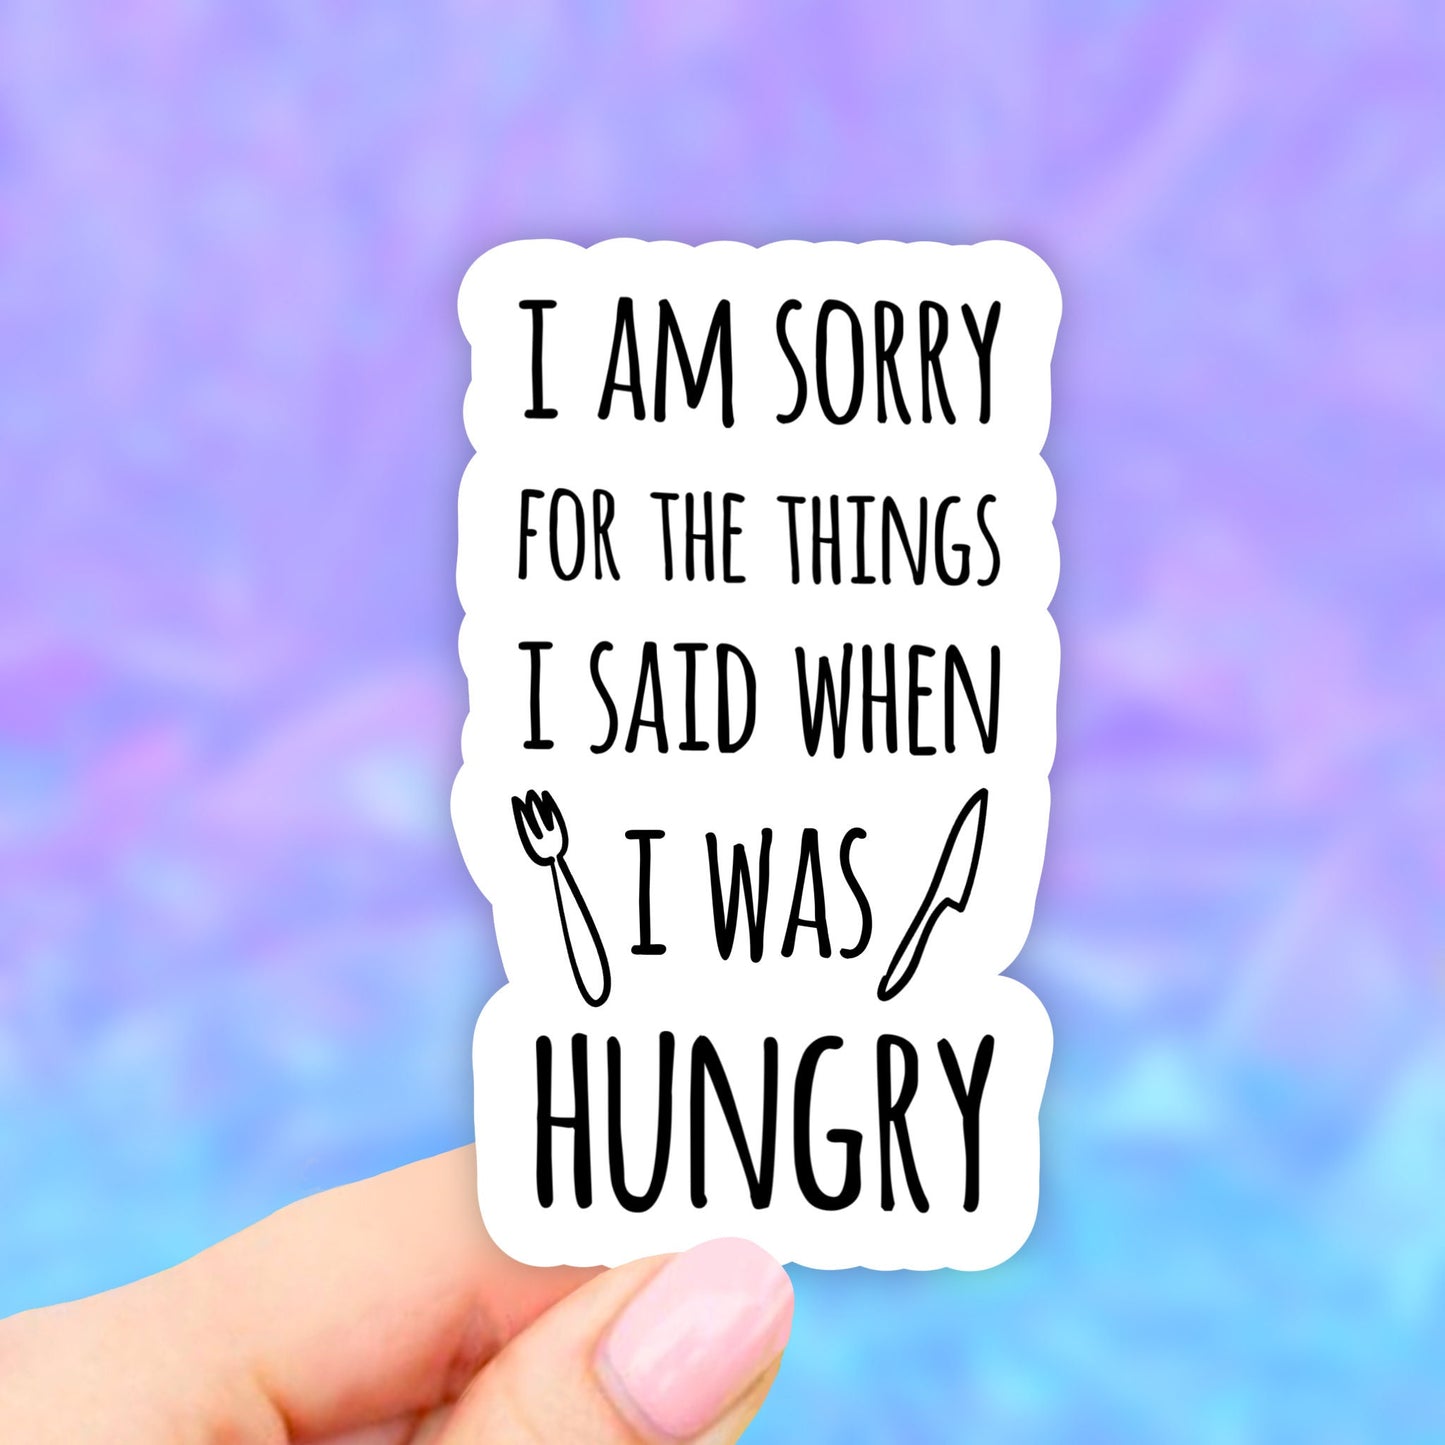 I am sorry for the things I said when i was hungry sticker, laptop stickers, water bottle stickers, computer stickers, Aesthetic stickers